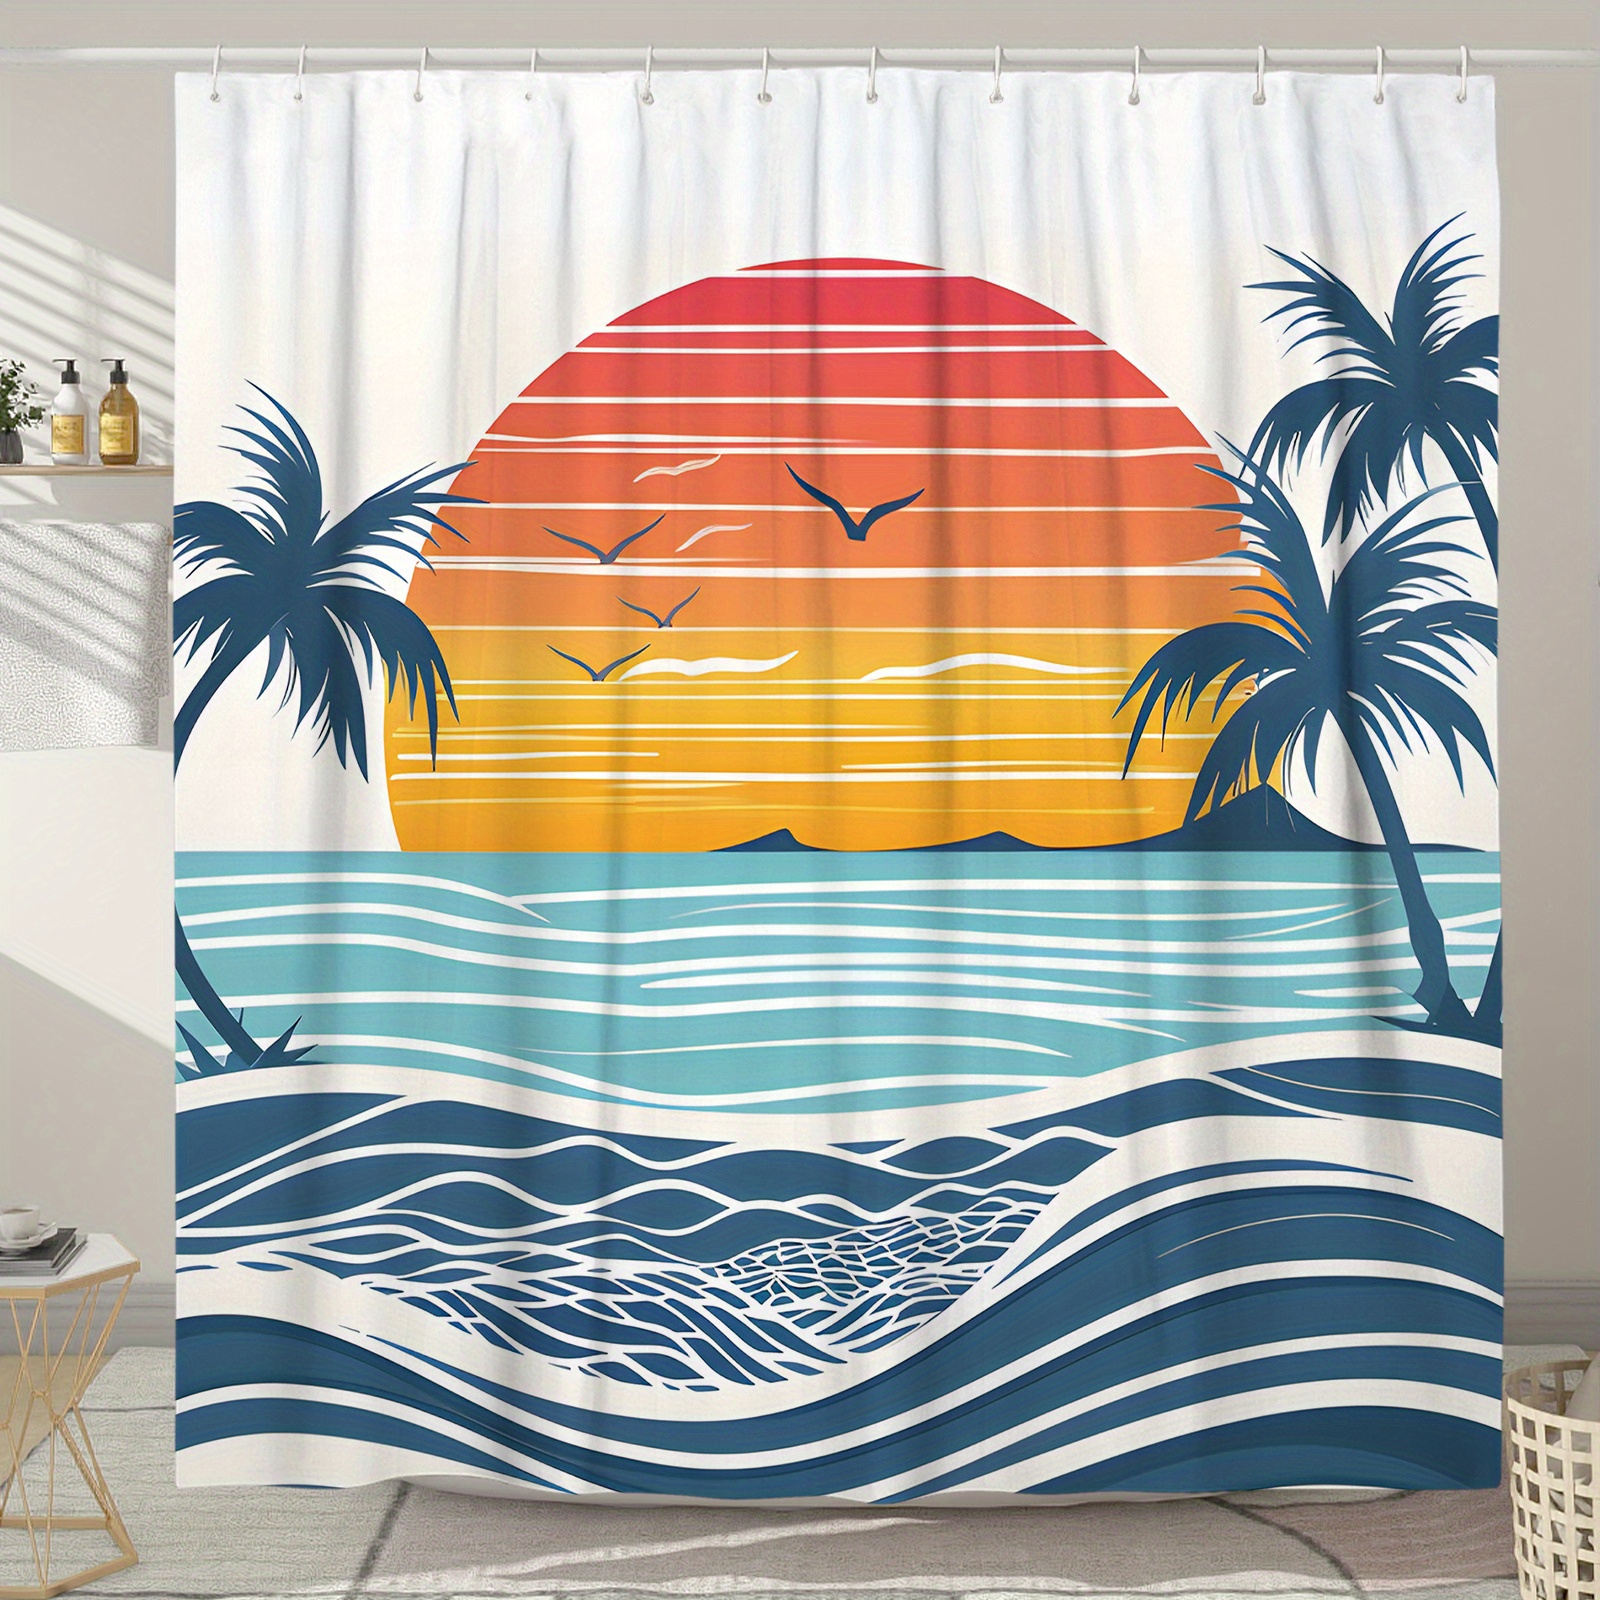 

1pc Bohemian Abstract Ocean Sunset Shower Curtain, 71x71 Inch, Tropical Palm Tree Beach Design, Waterproof Polyester Bathroom Decor With 12 Hooks, Machine Washable, Modern Home Decoration